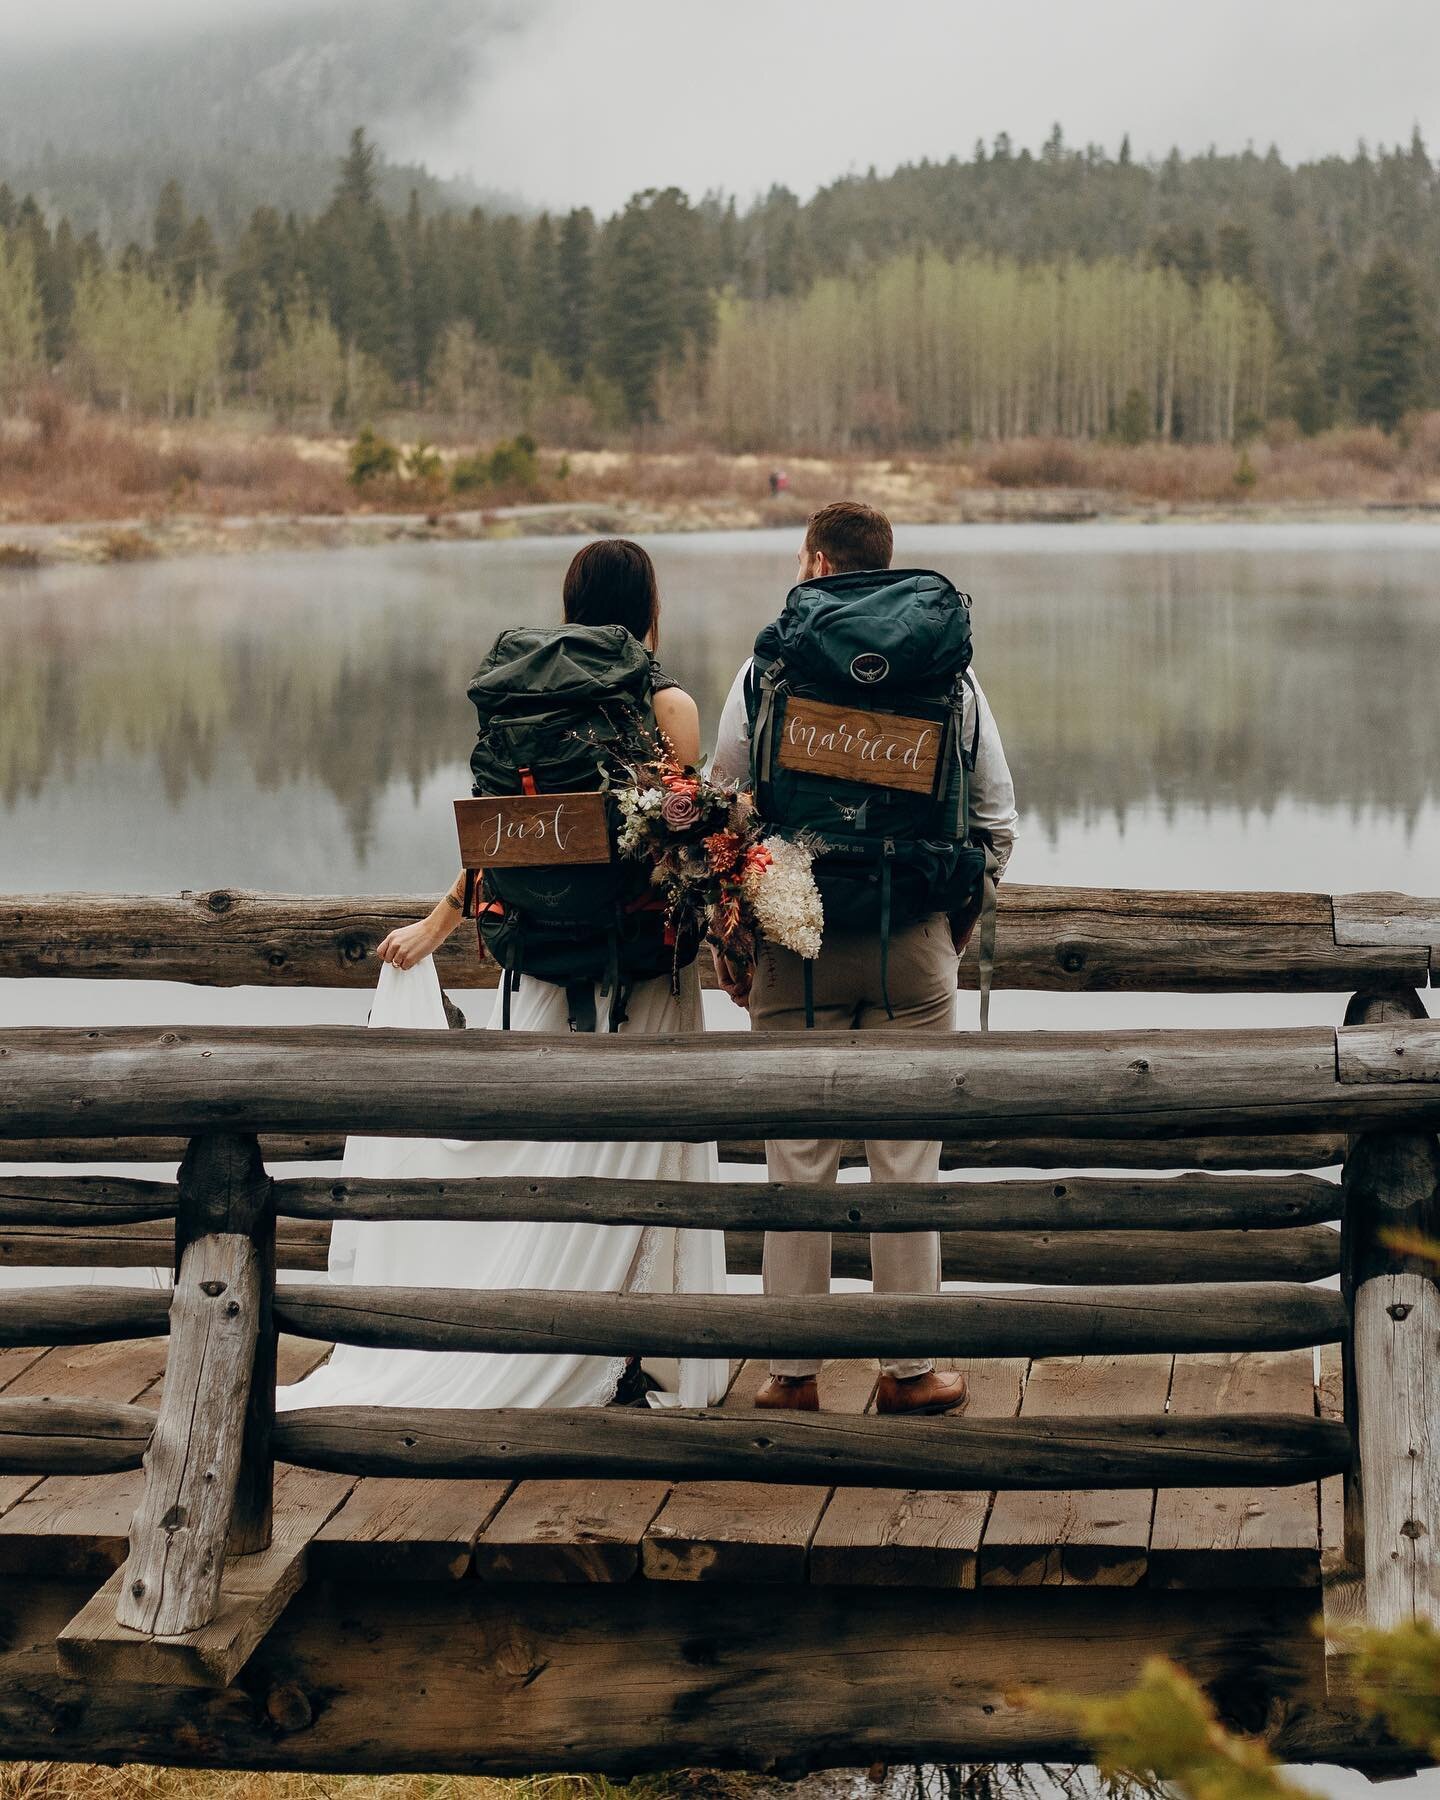 Let&rsquo;s just wake up early and go for an adventure that would last a lifetime.
🏔
🏔
🏔
🏔
🏔
#letselope #letsgo #hikersofcolorado #letshiketogether #adventure #coupleswhoadventure #elope #earlybird #elopementphotographer #viewsfordays #coloradob